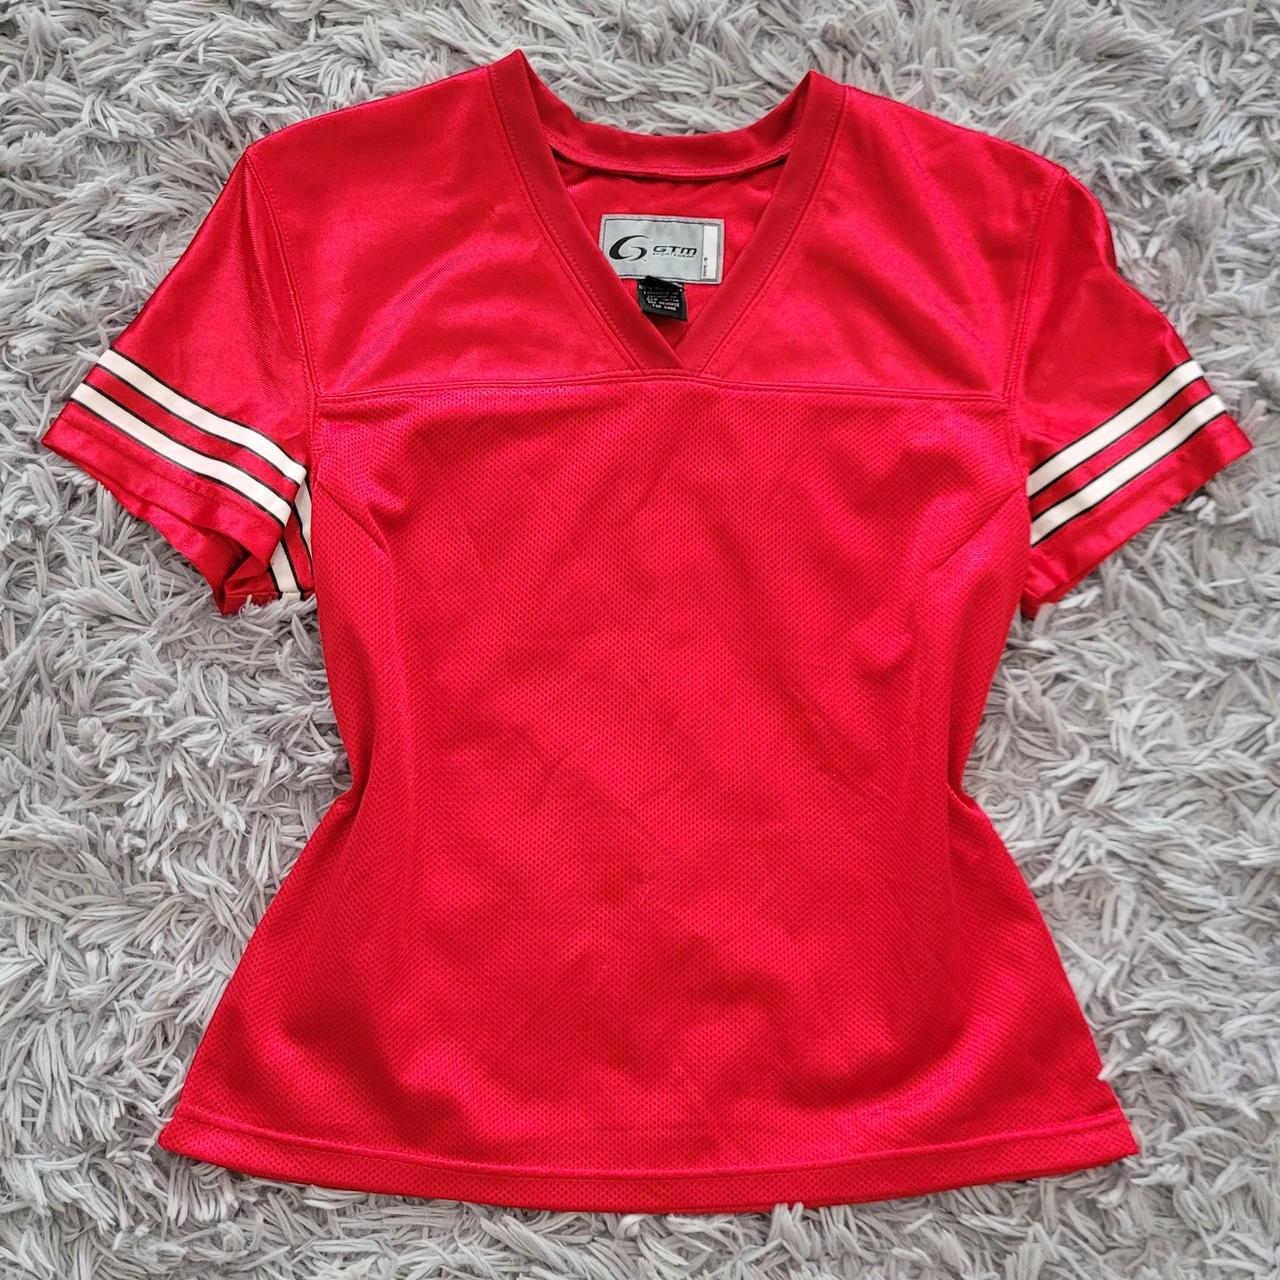 Women's Red and White T-shirt